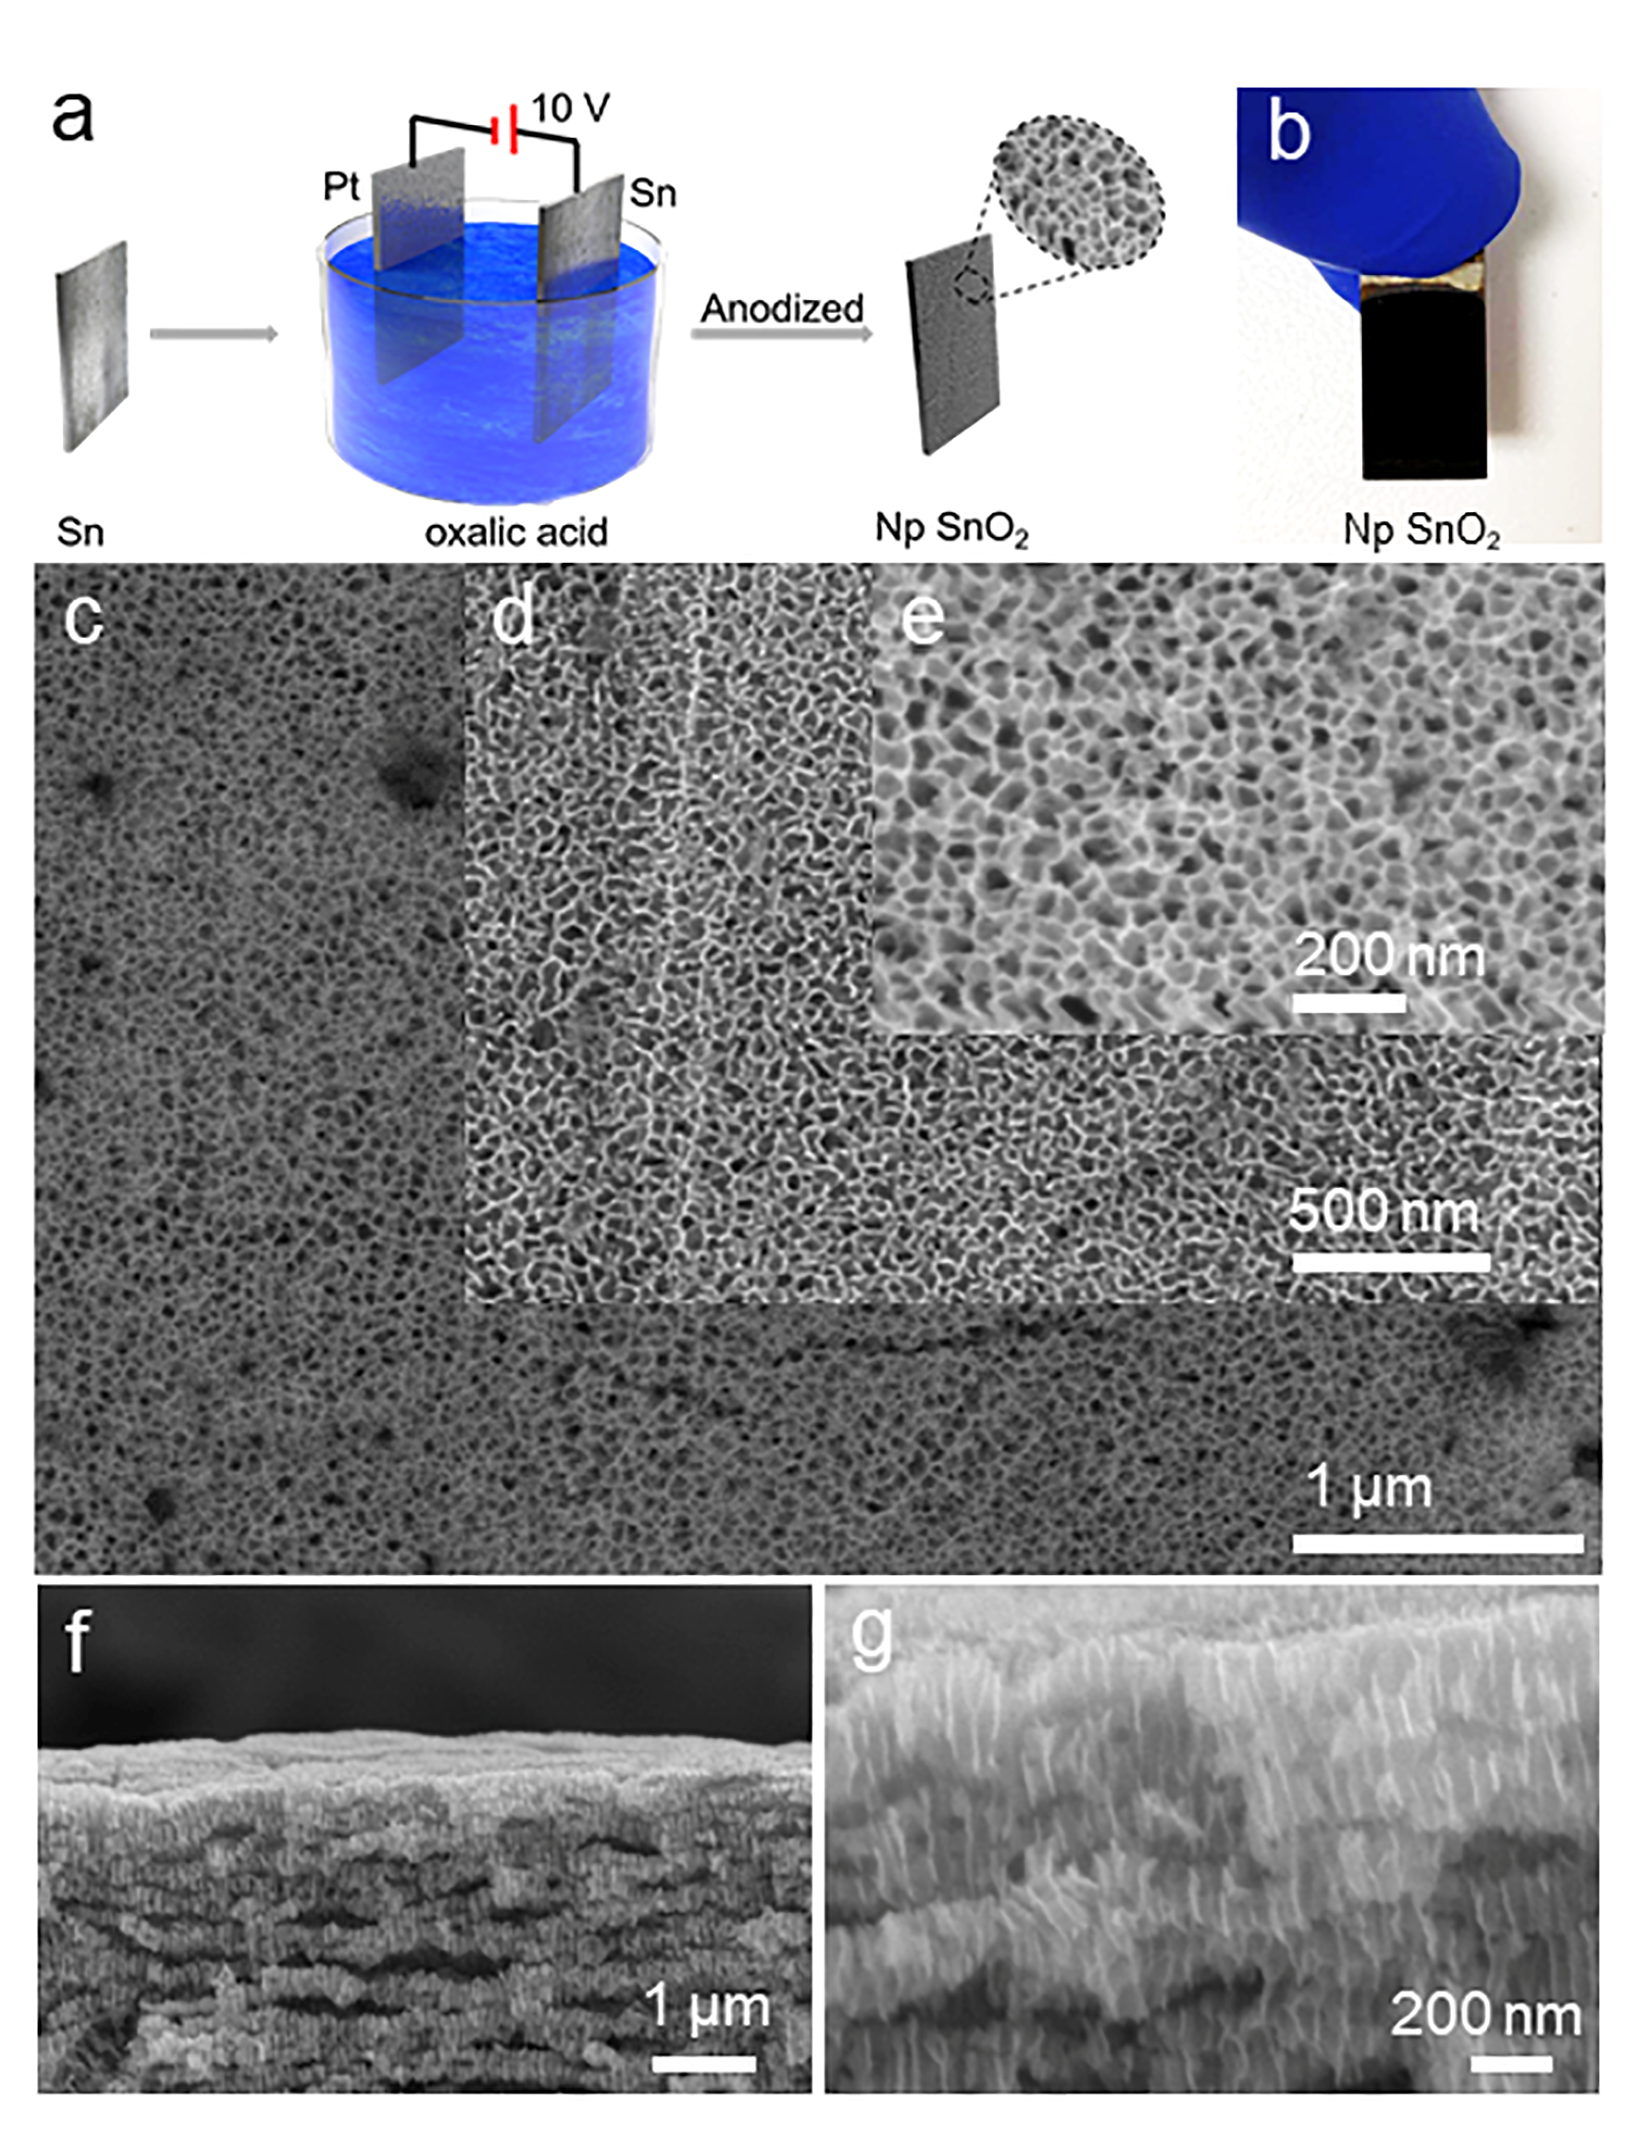 Stability improvement for dried droplet pretreatment by suppression of coffee ring effect using electrochemical anodized nanoporous tin dioxide substrate